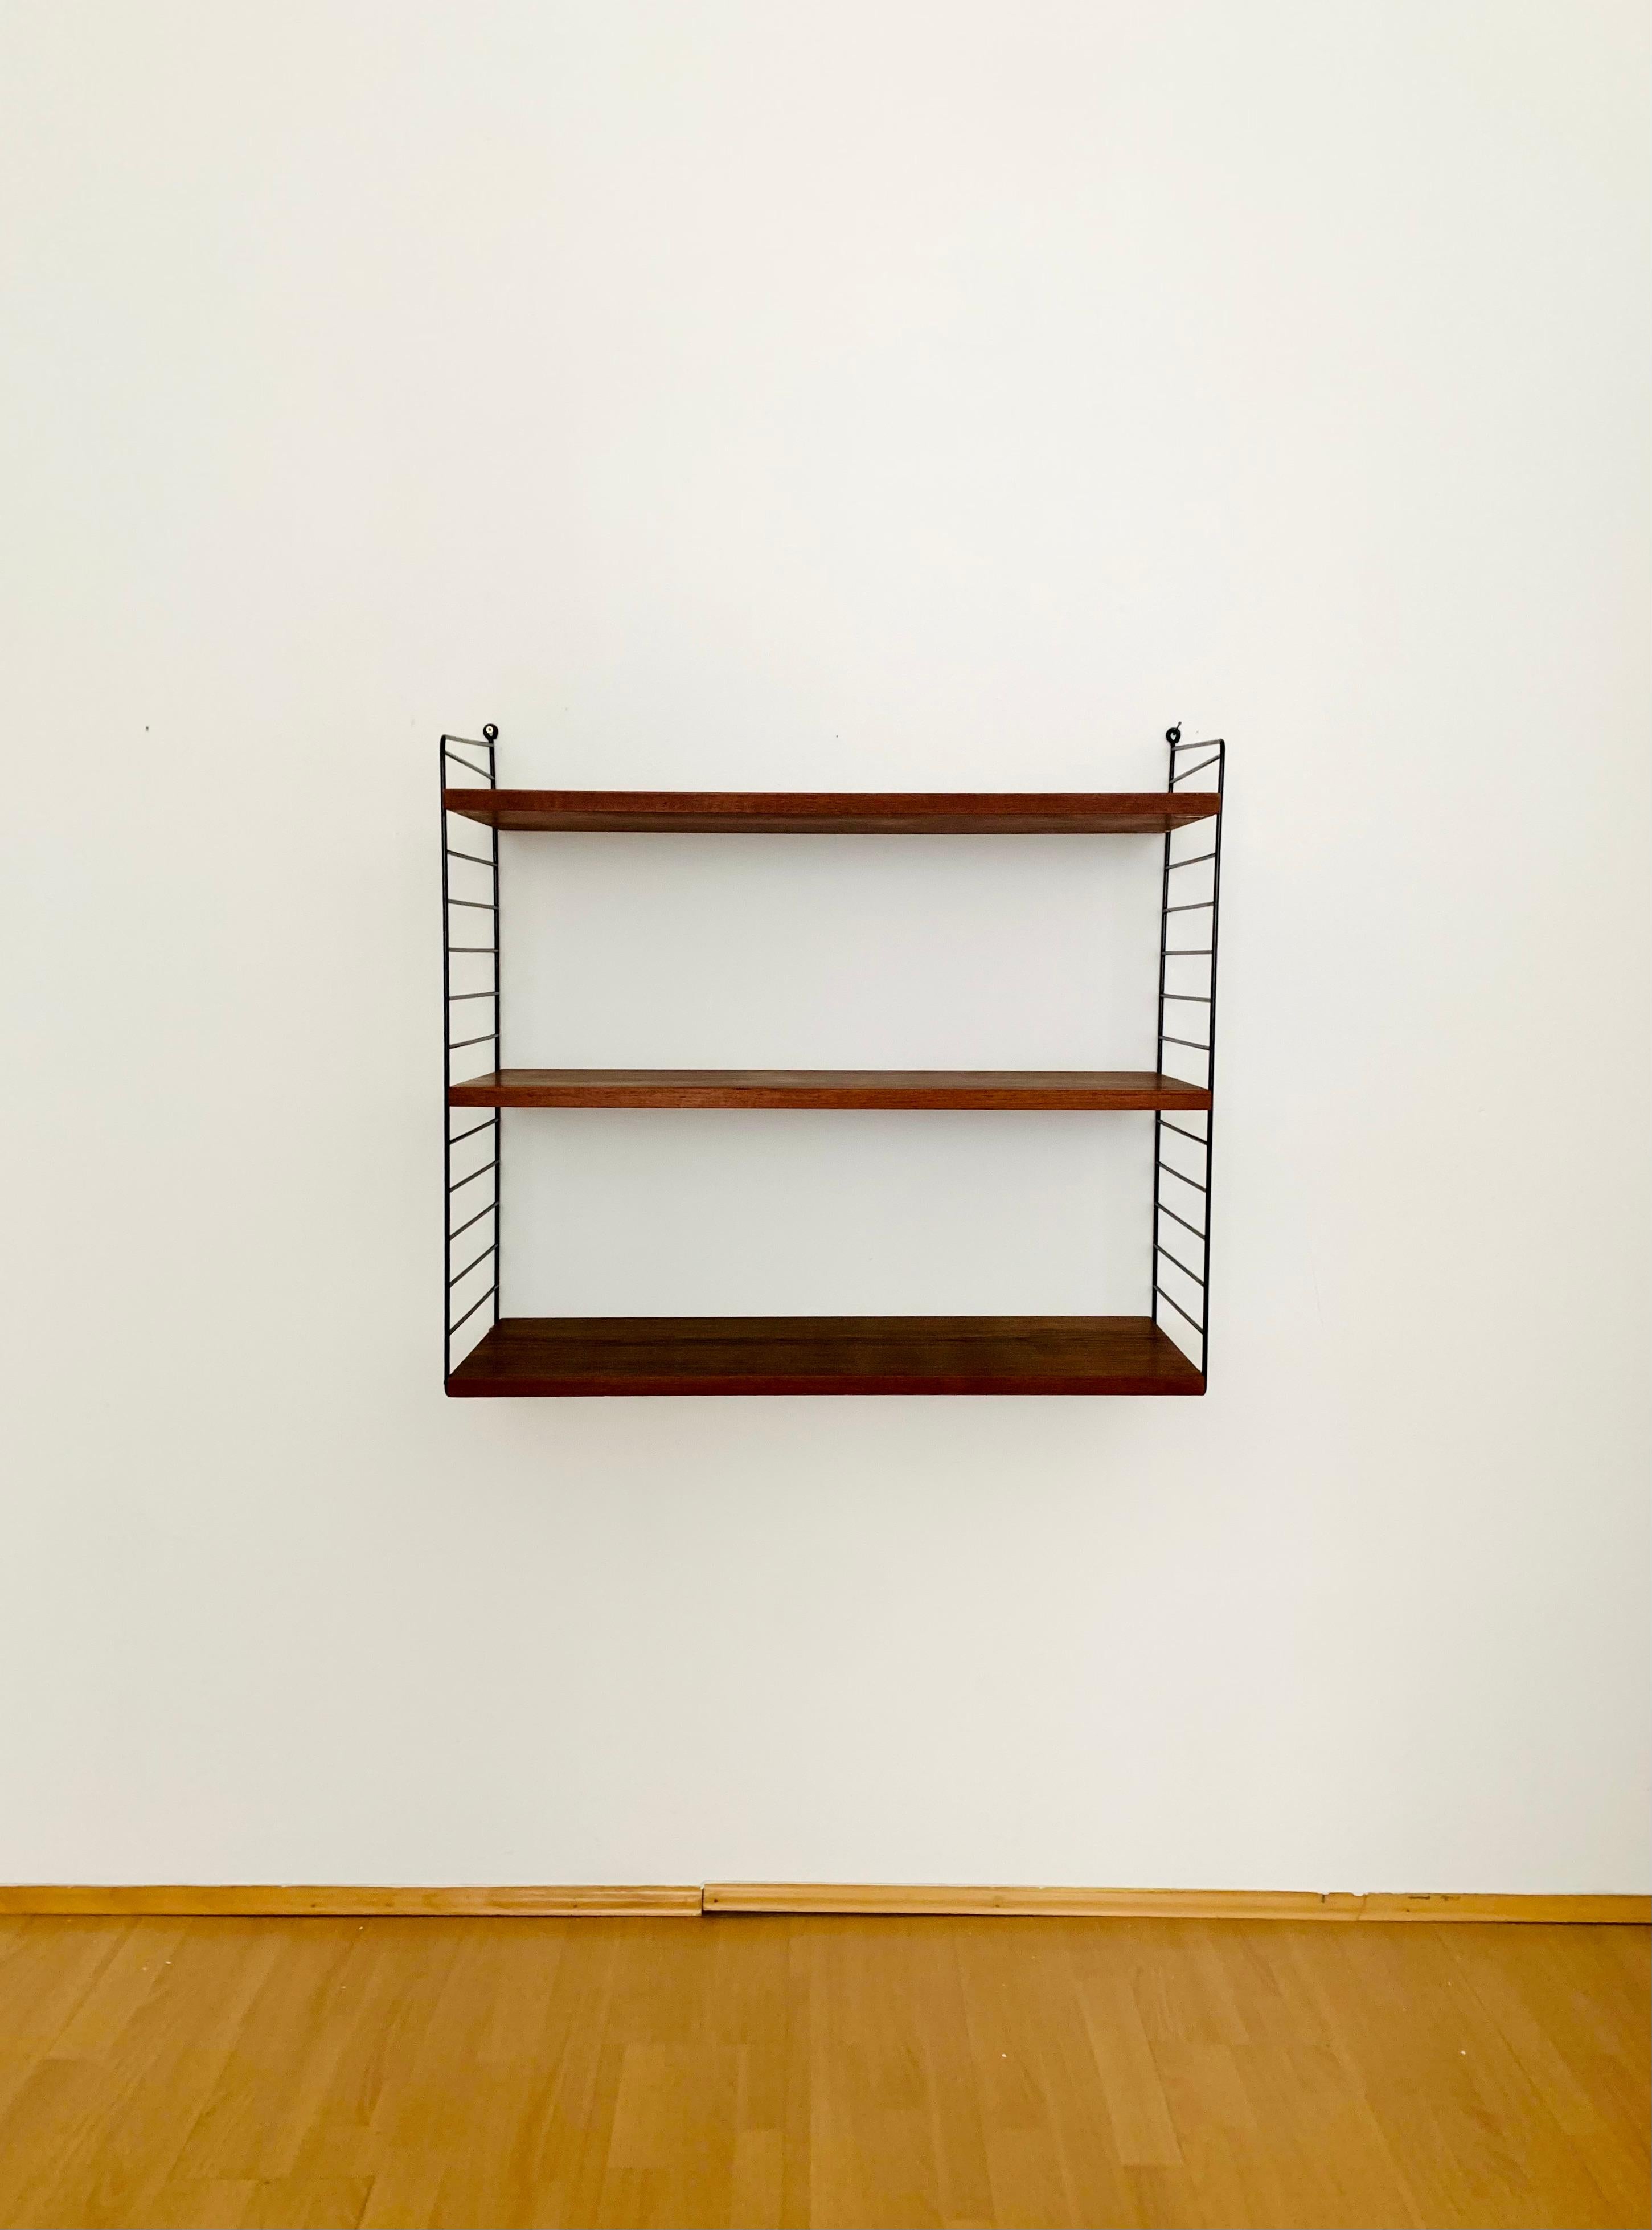 Beautiful teak shelf from the 1950s.
Wonderful high-quality workmanship and an absolute favorite piece.
The shelves are particularly durable and sturdy.

Design: Kajsa & Nils Nisse Strinning
Manufacturer: String Design

Condition:

Very good vintage